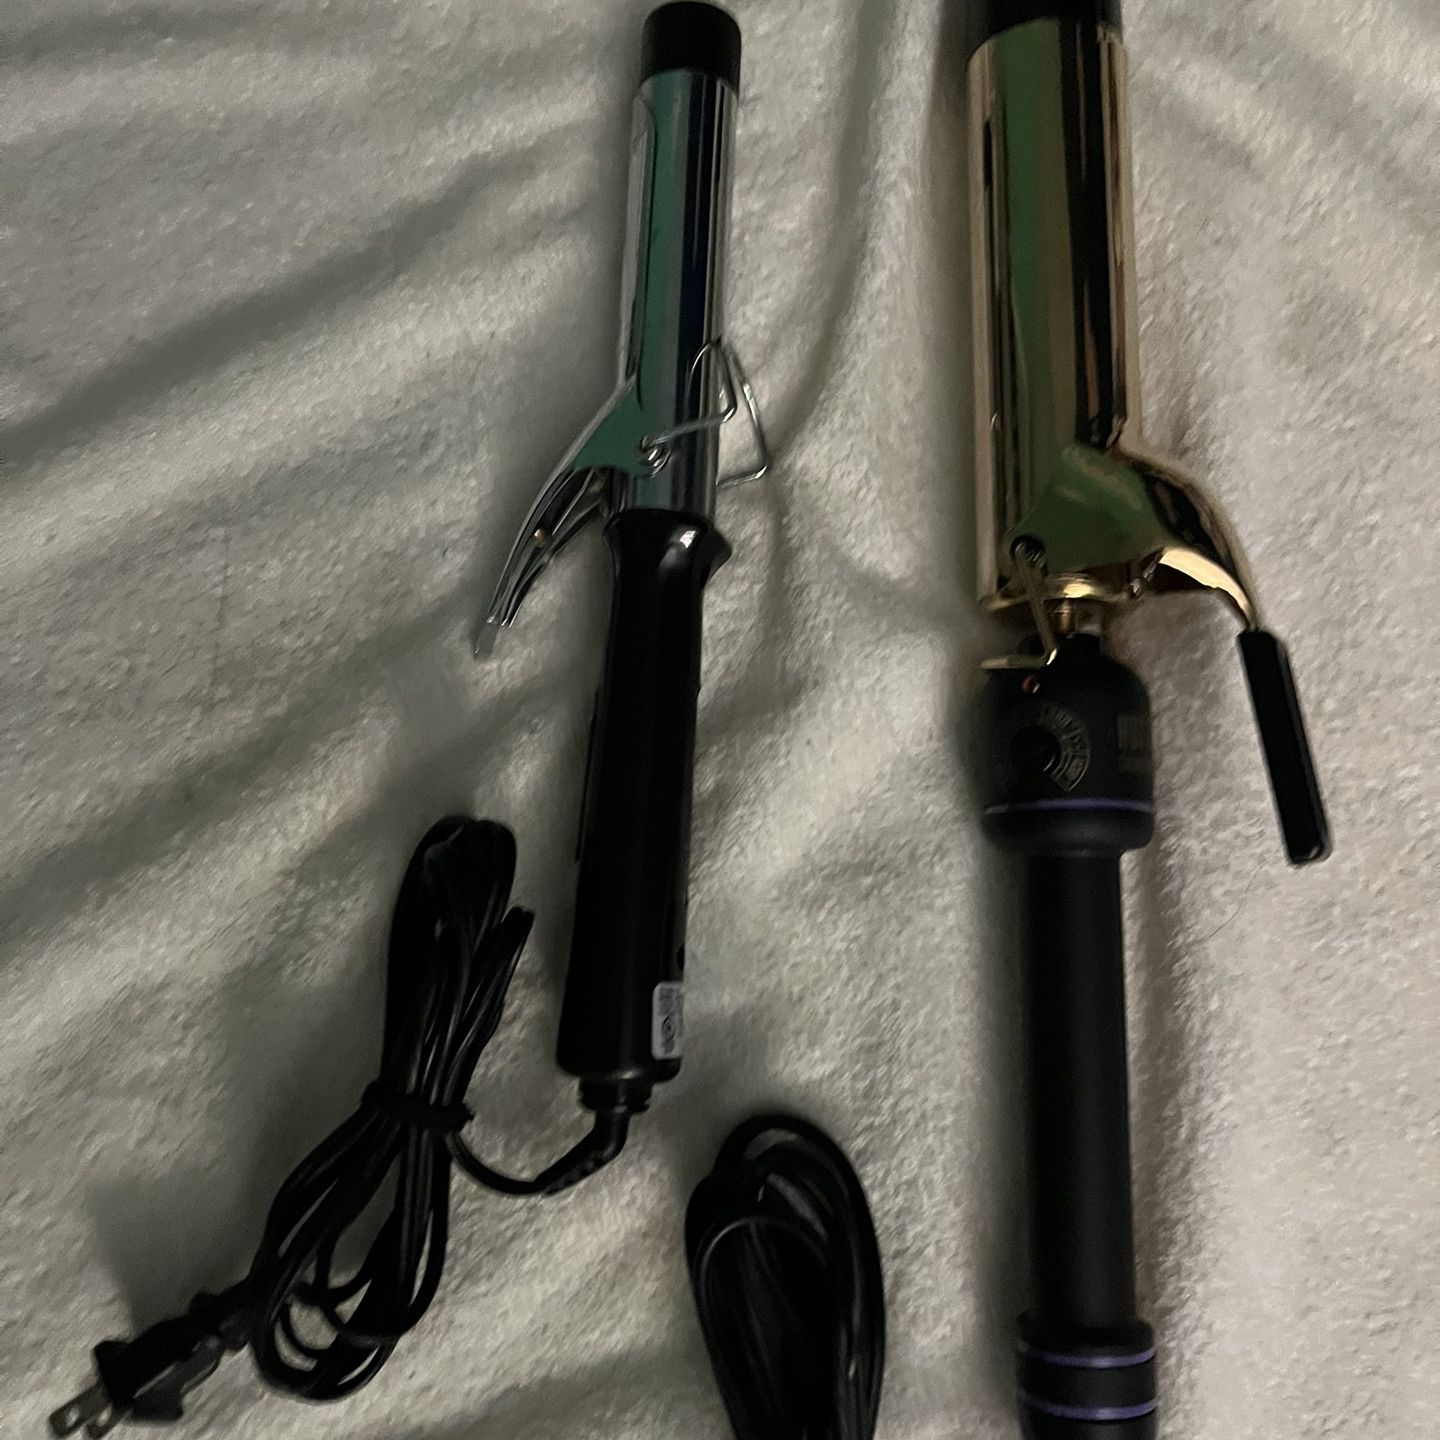 (x2) Curling Irons 